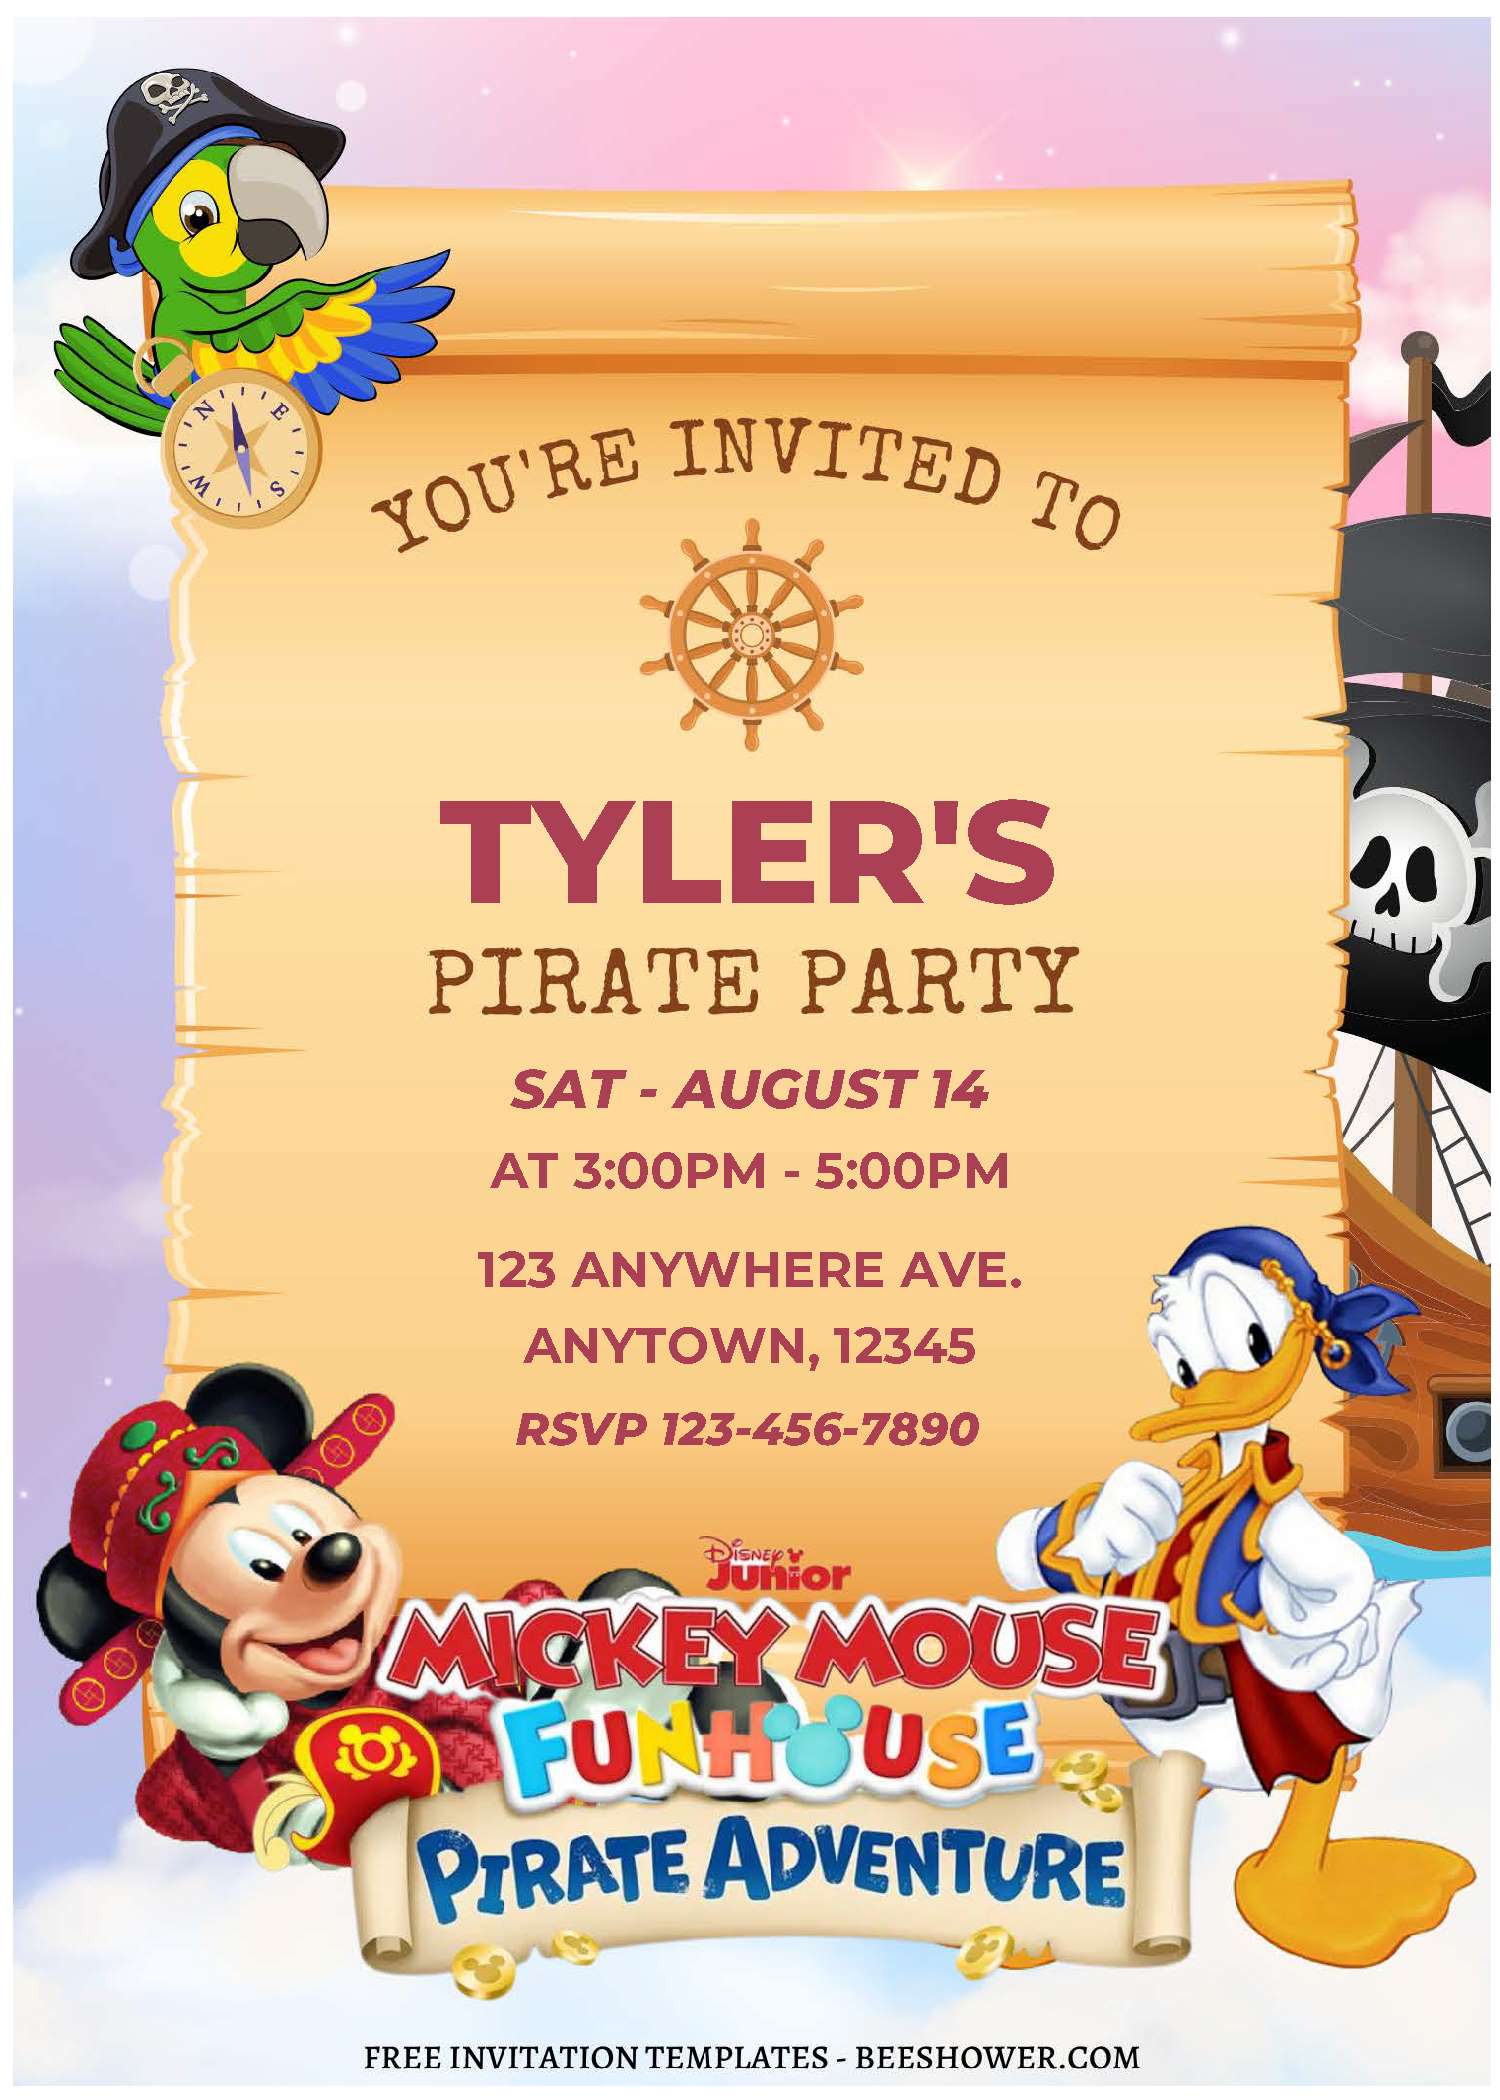 (Free Editable PDF) Mickey Mouse Pirate Baby Shower Invitation Templates C